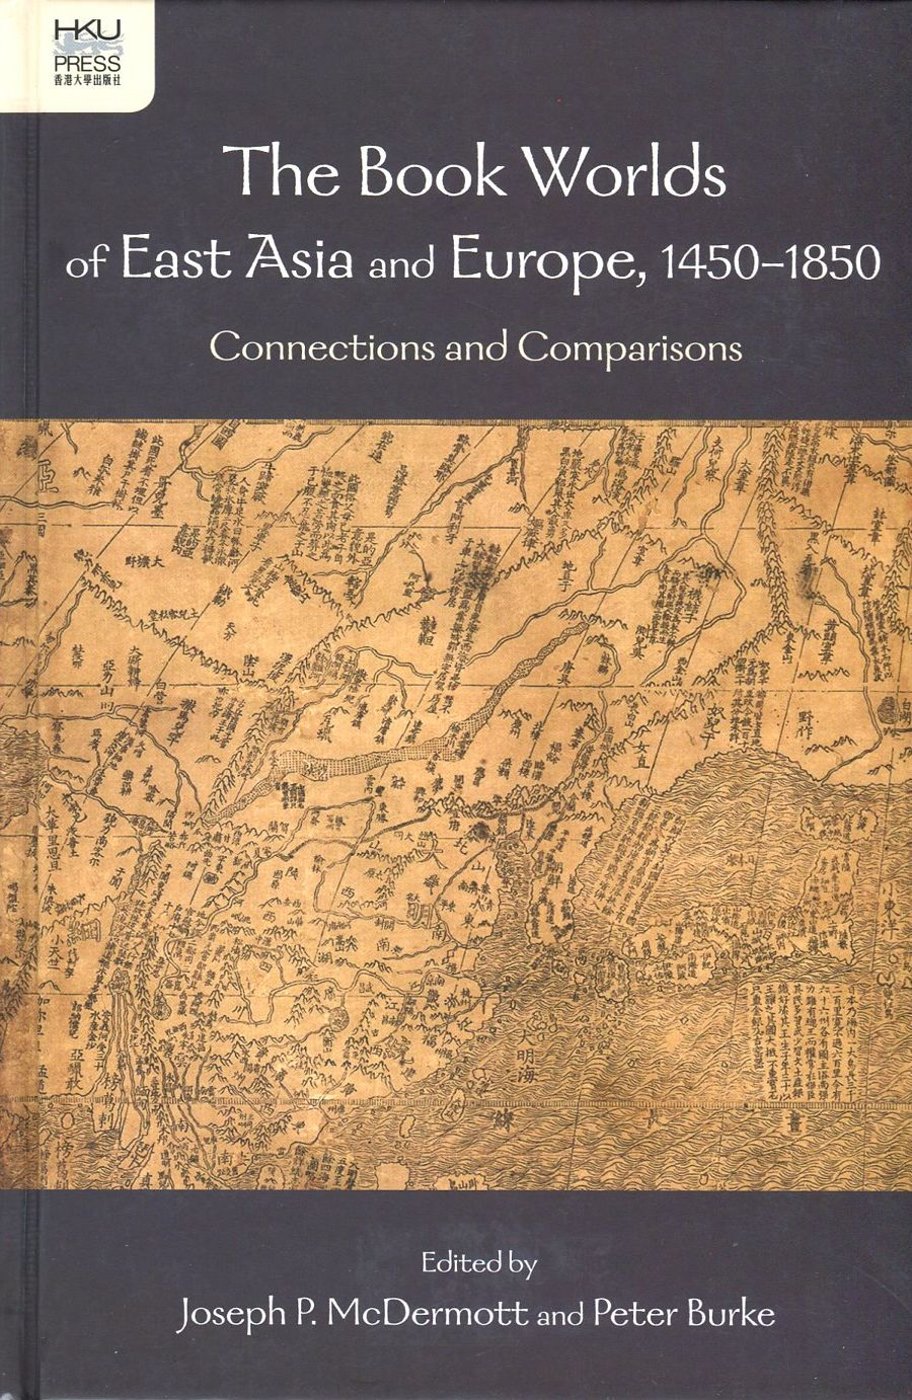 The Book Worlds of East Asia a...